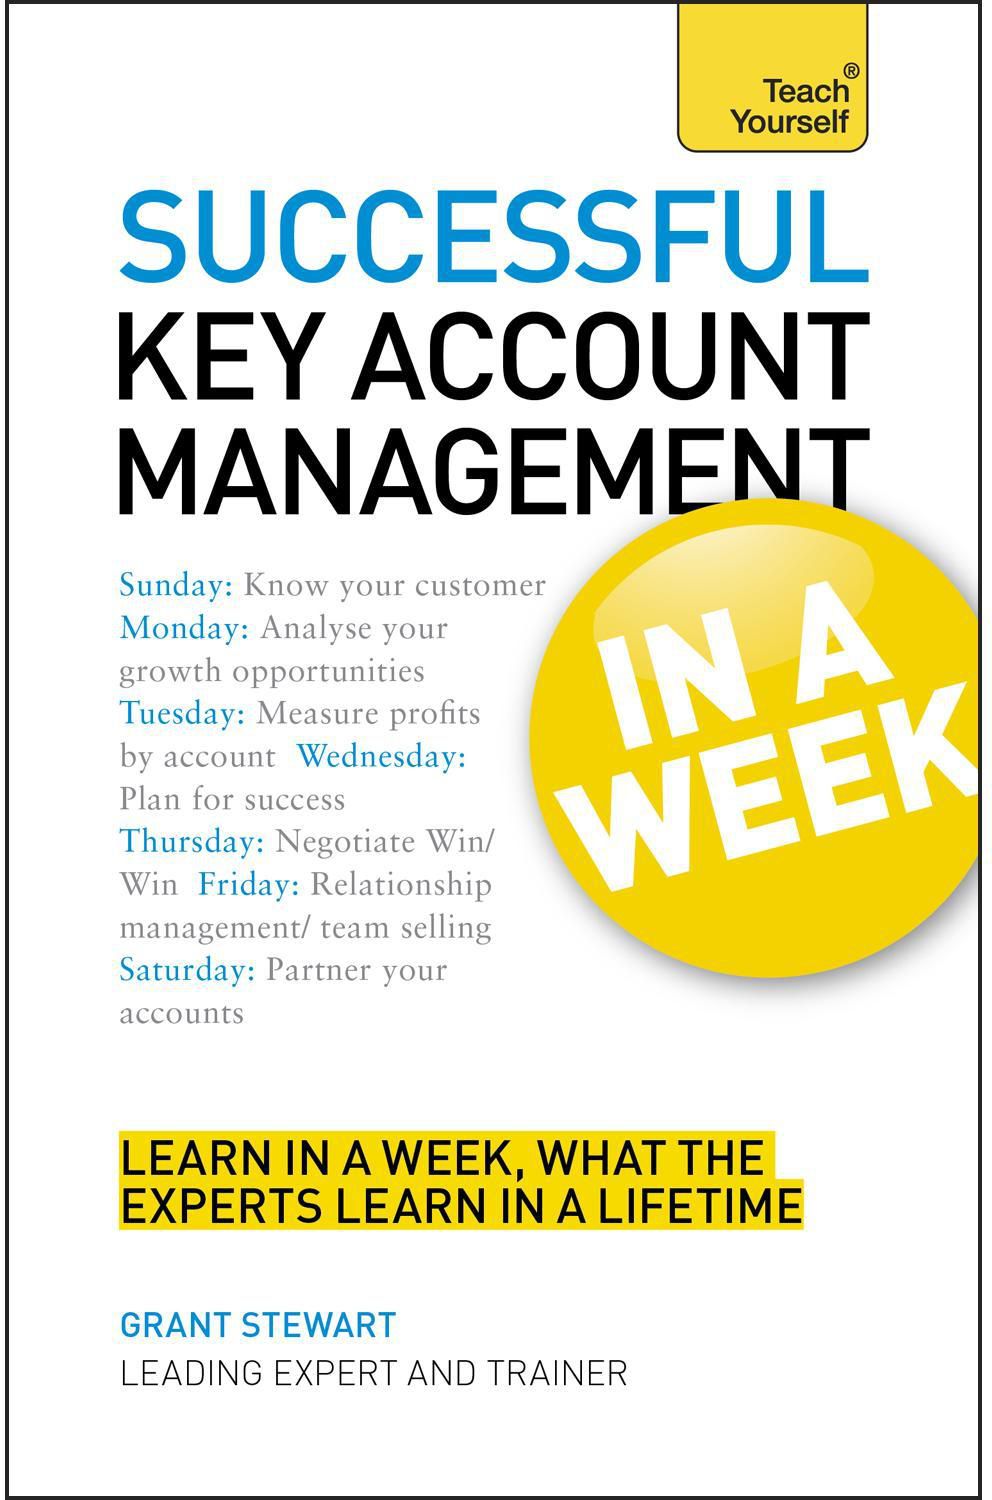 Successful Key Account Management in a Week (Teach Yourself)